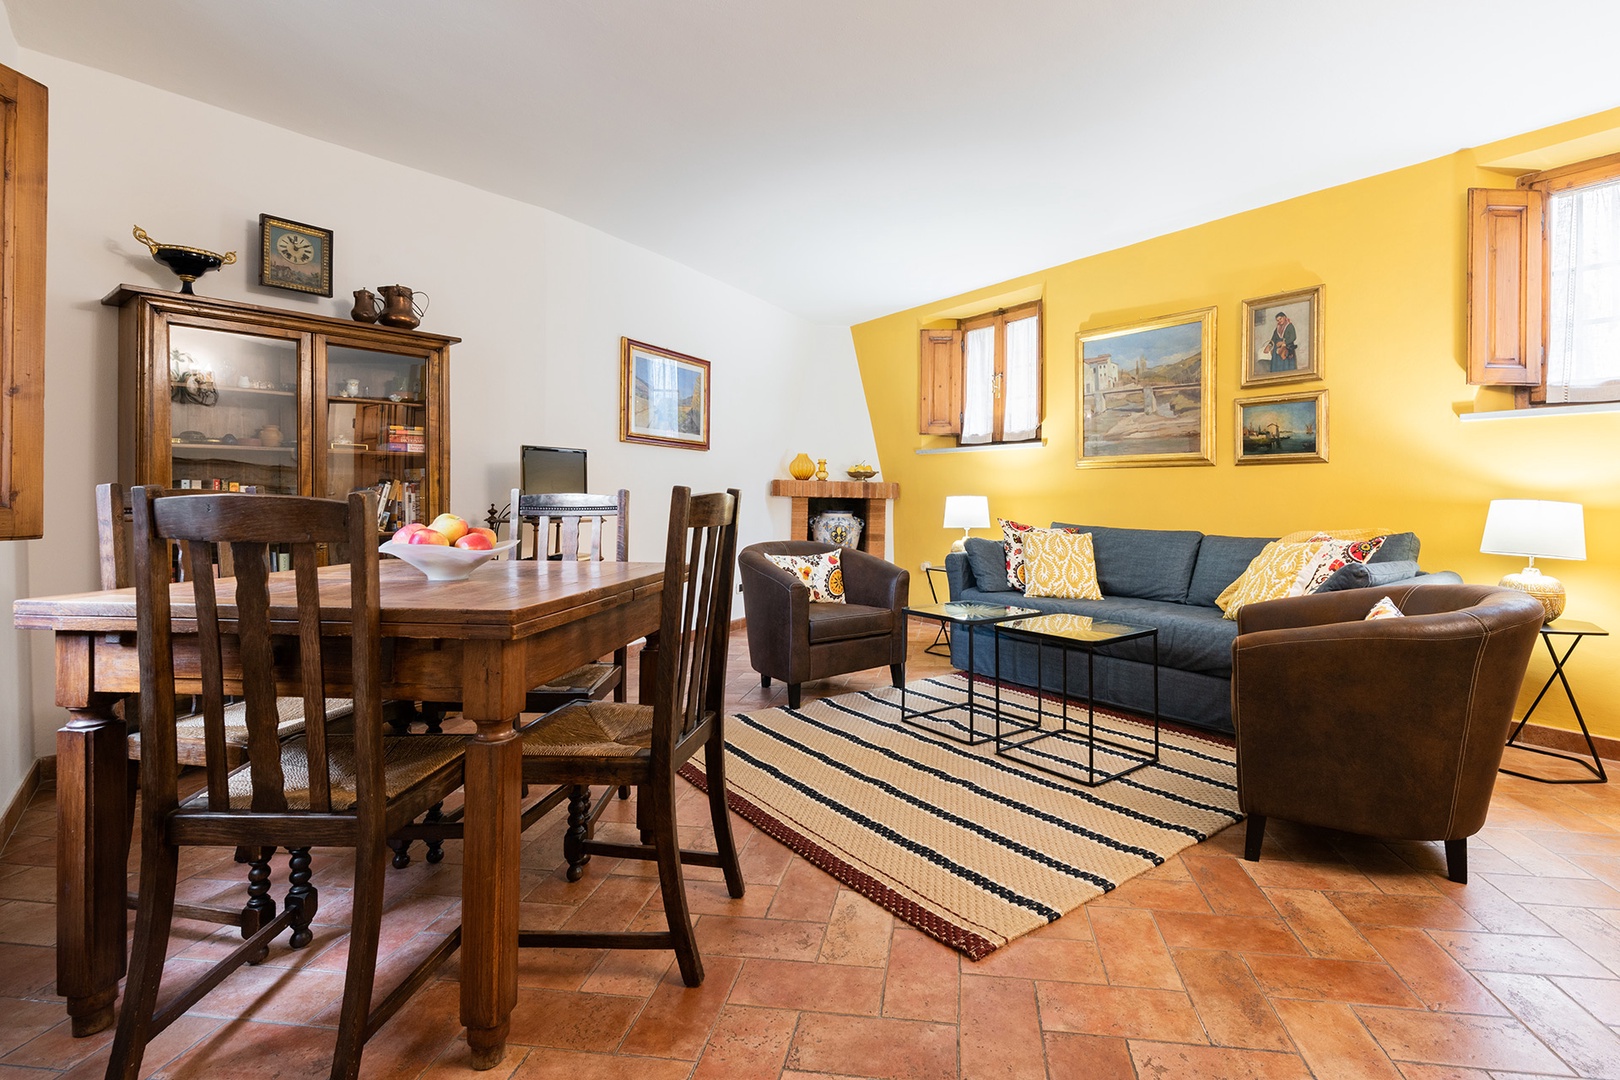 Casetta offers charm, comfort and a great Ponte Vecchio location in the heart of historic Florence.